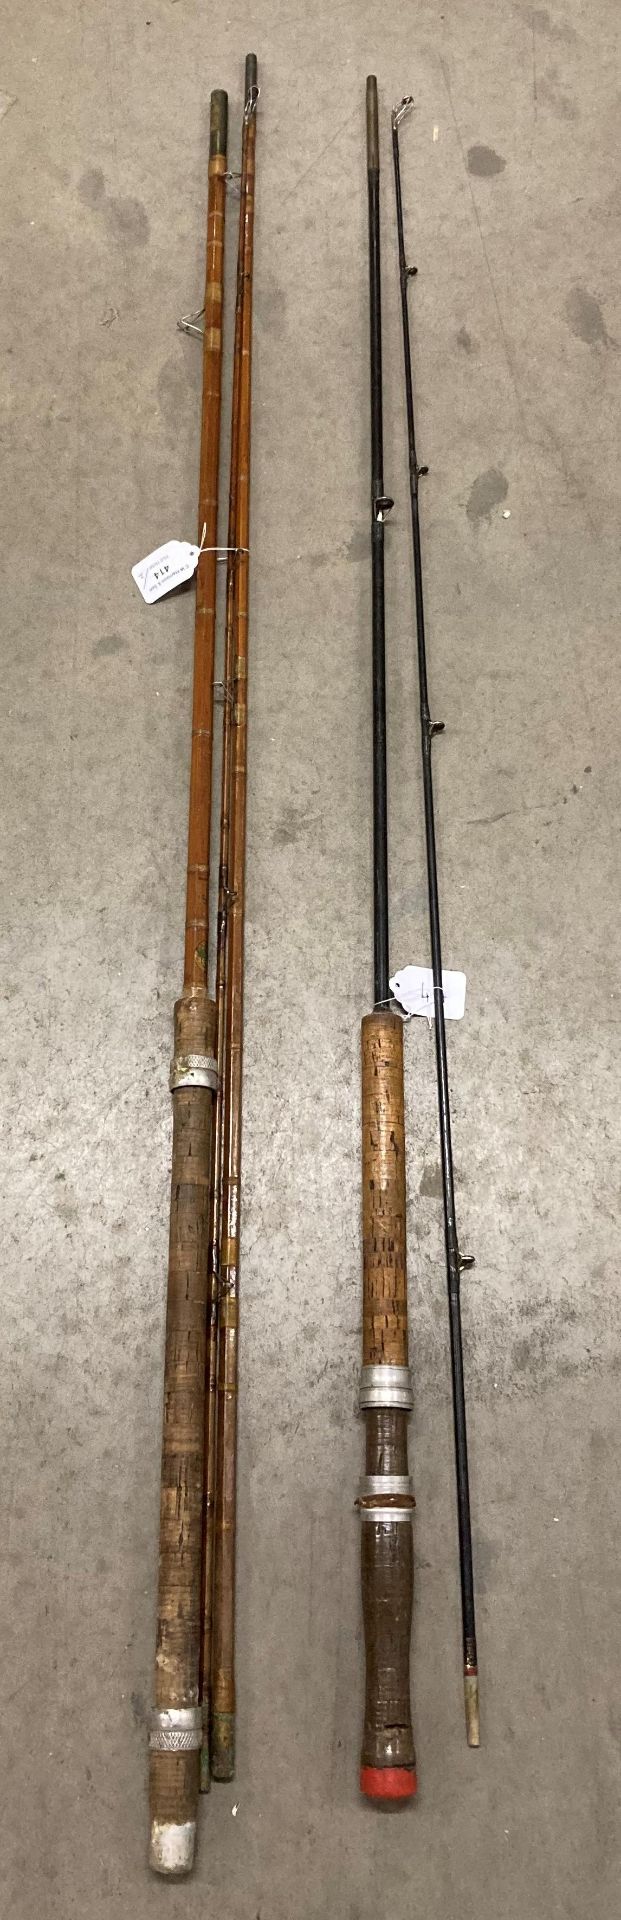 Two vintage fishing rods,